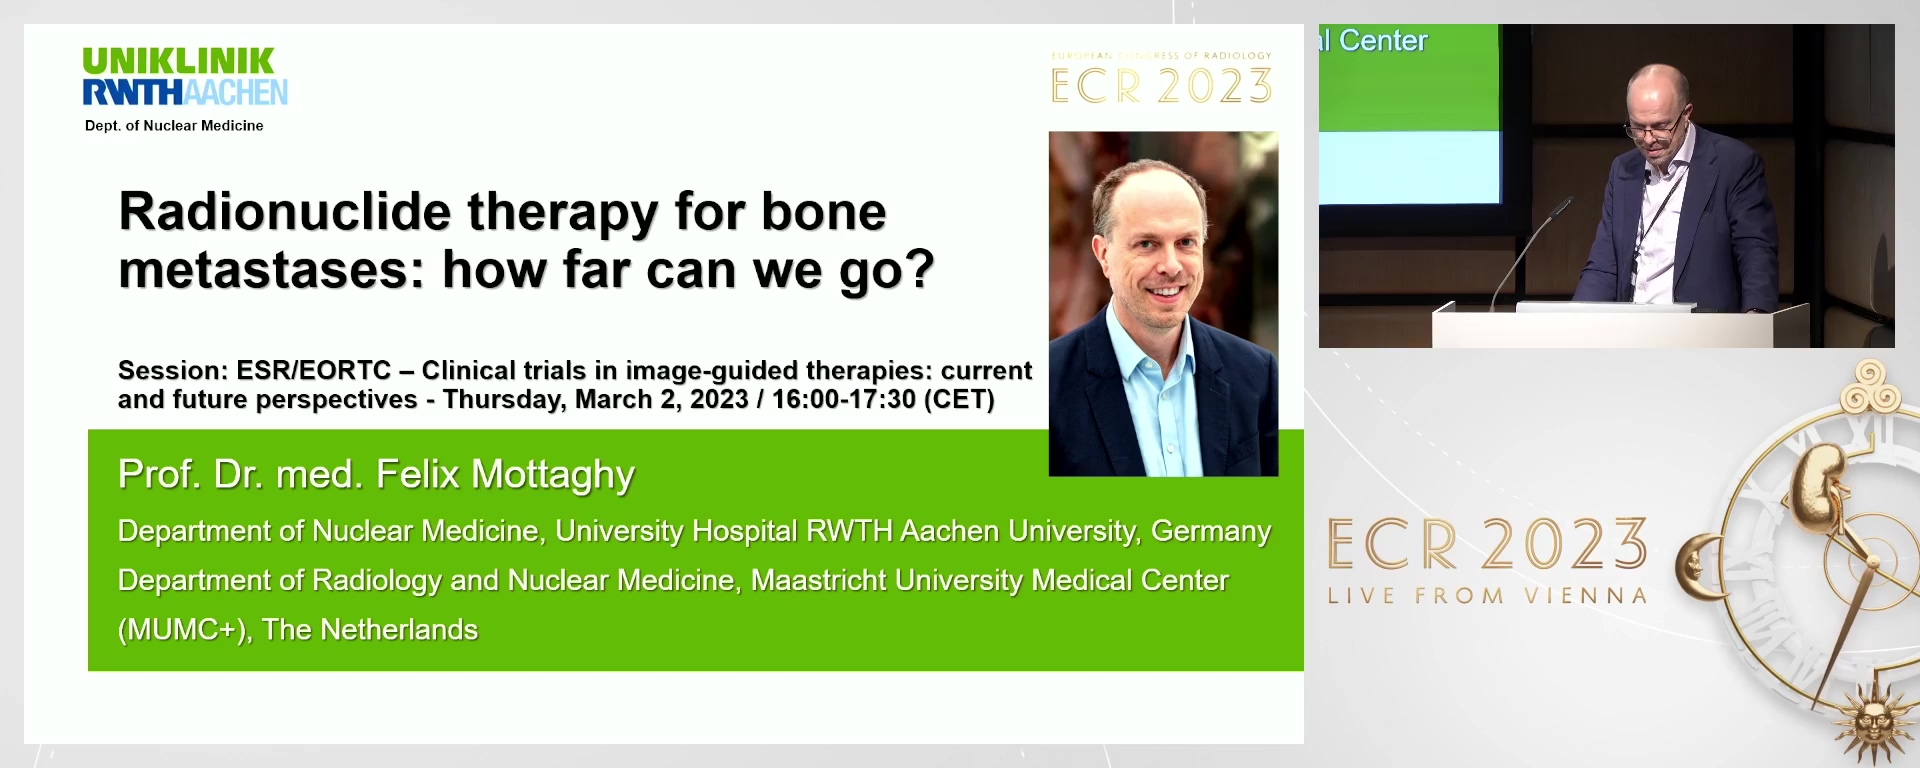 Radionuclide therapy for bone metastases: how far can we go?